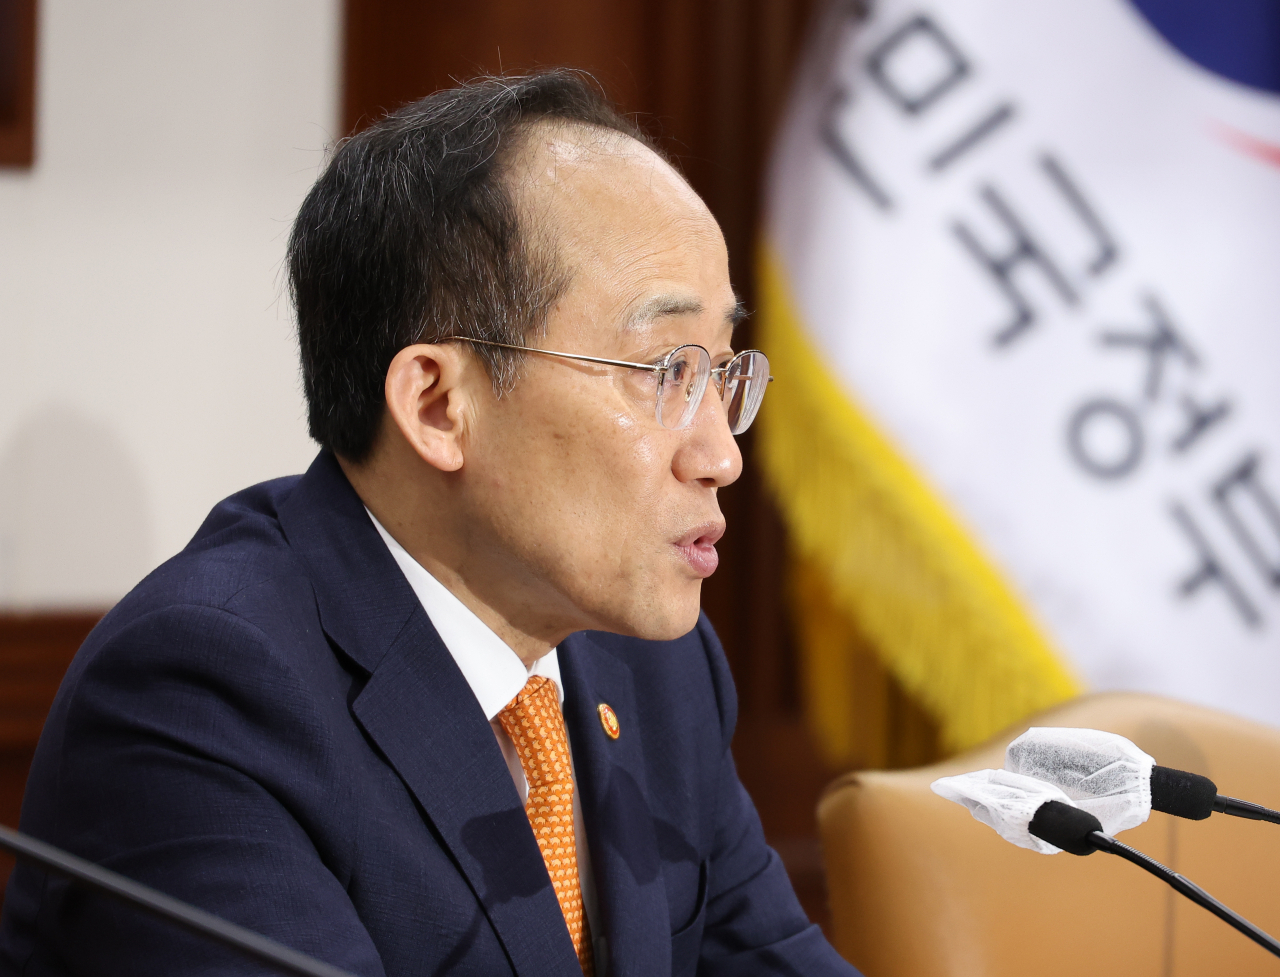 Finance Minister Choo Kyung-ho speaks during a meeting with economy-related ministers in Seoul on Wednesday. (Yonhap)